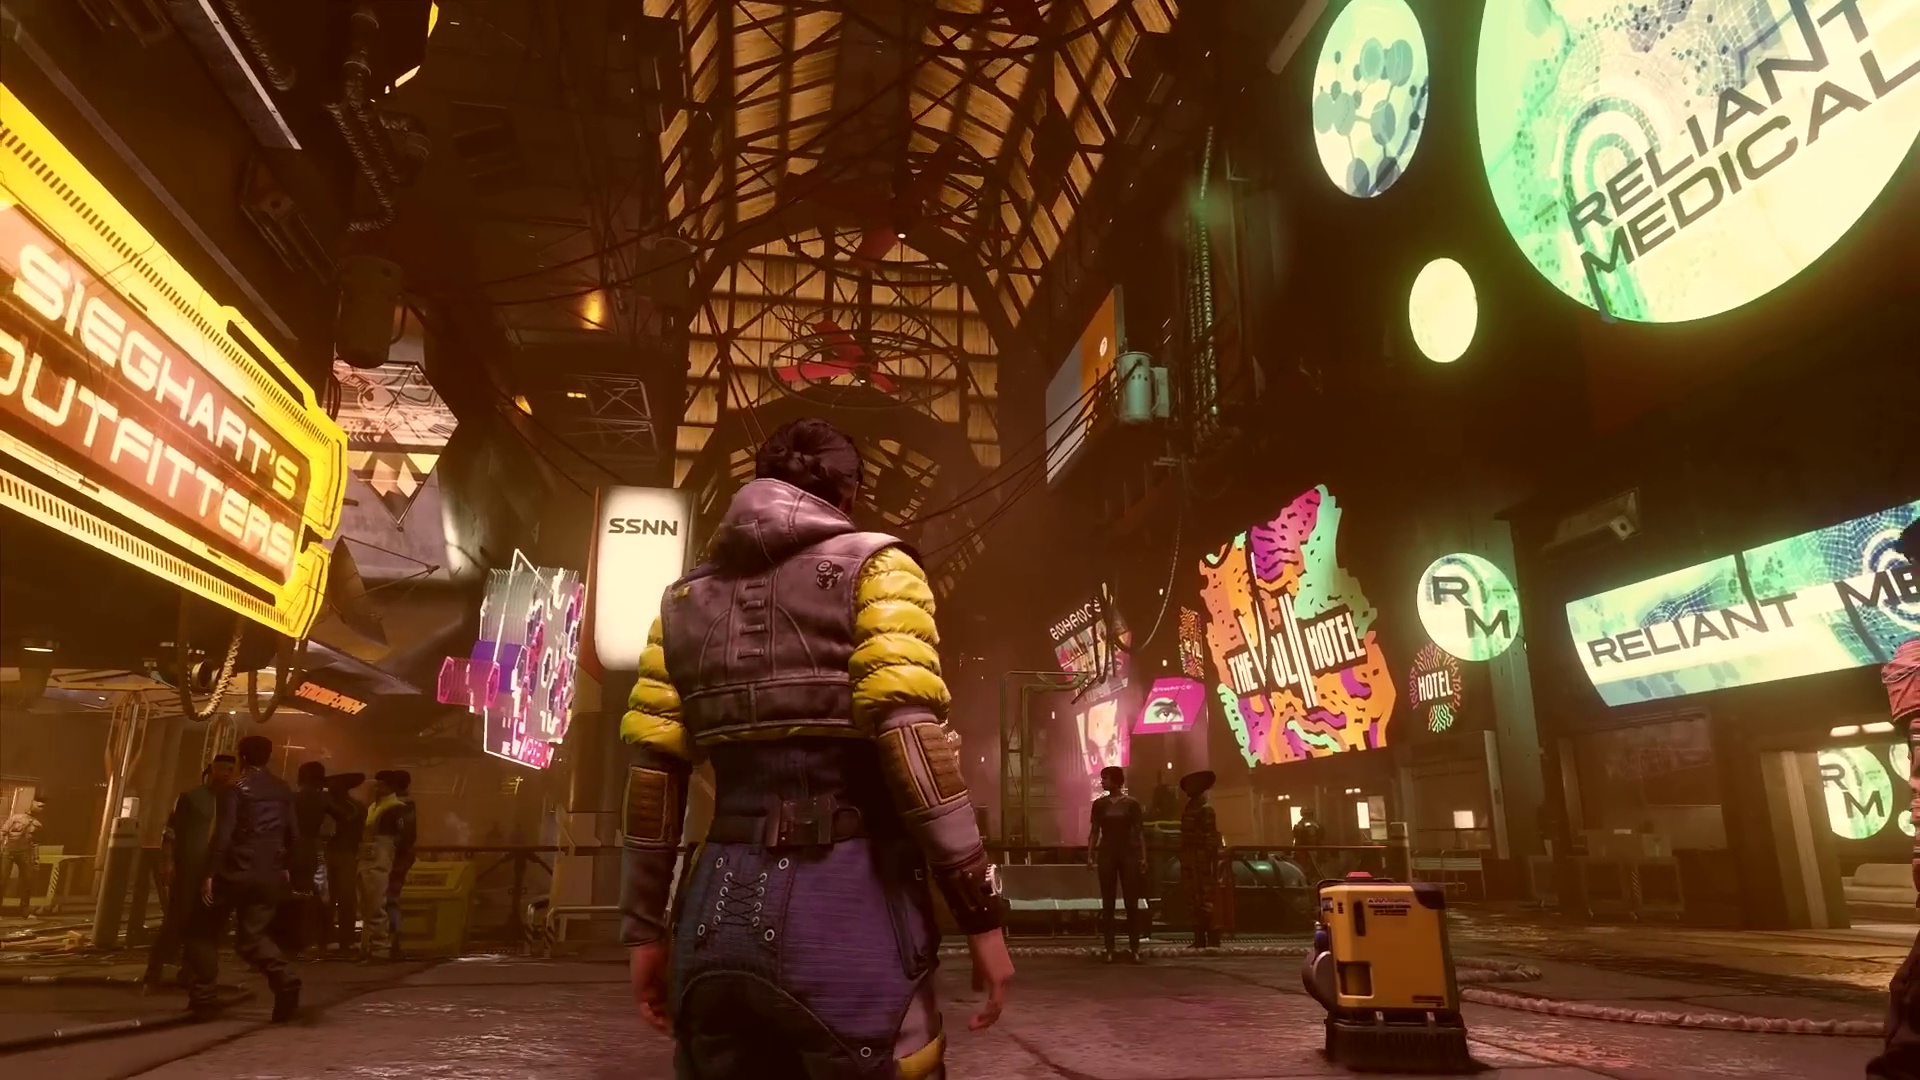 (Neo exudes a dystopian touch of cyberpunk.)